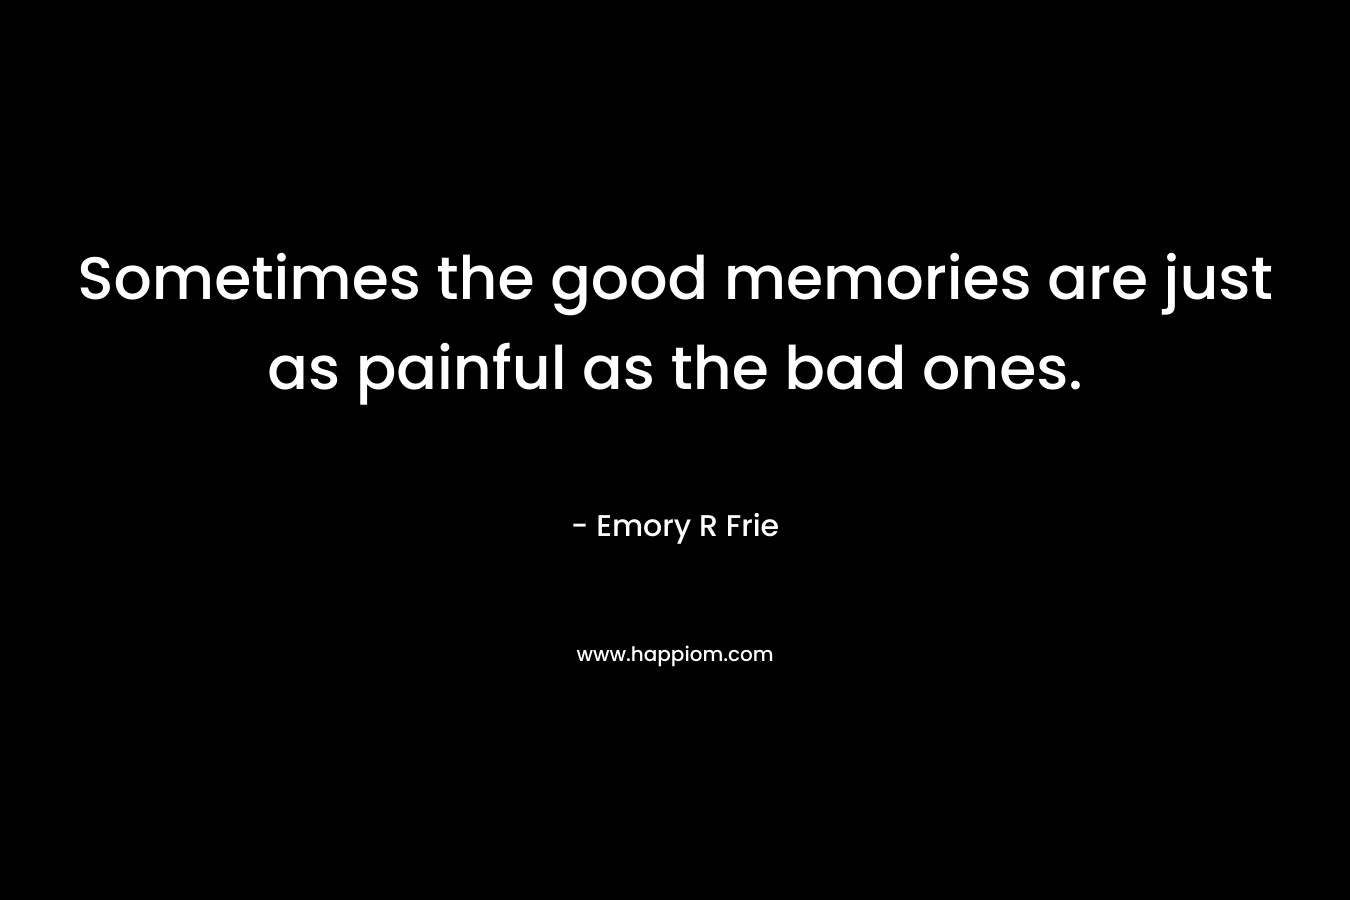 Sometimes the good memories are just as painful as the bad ones.